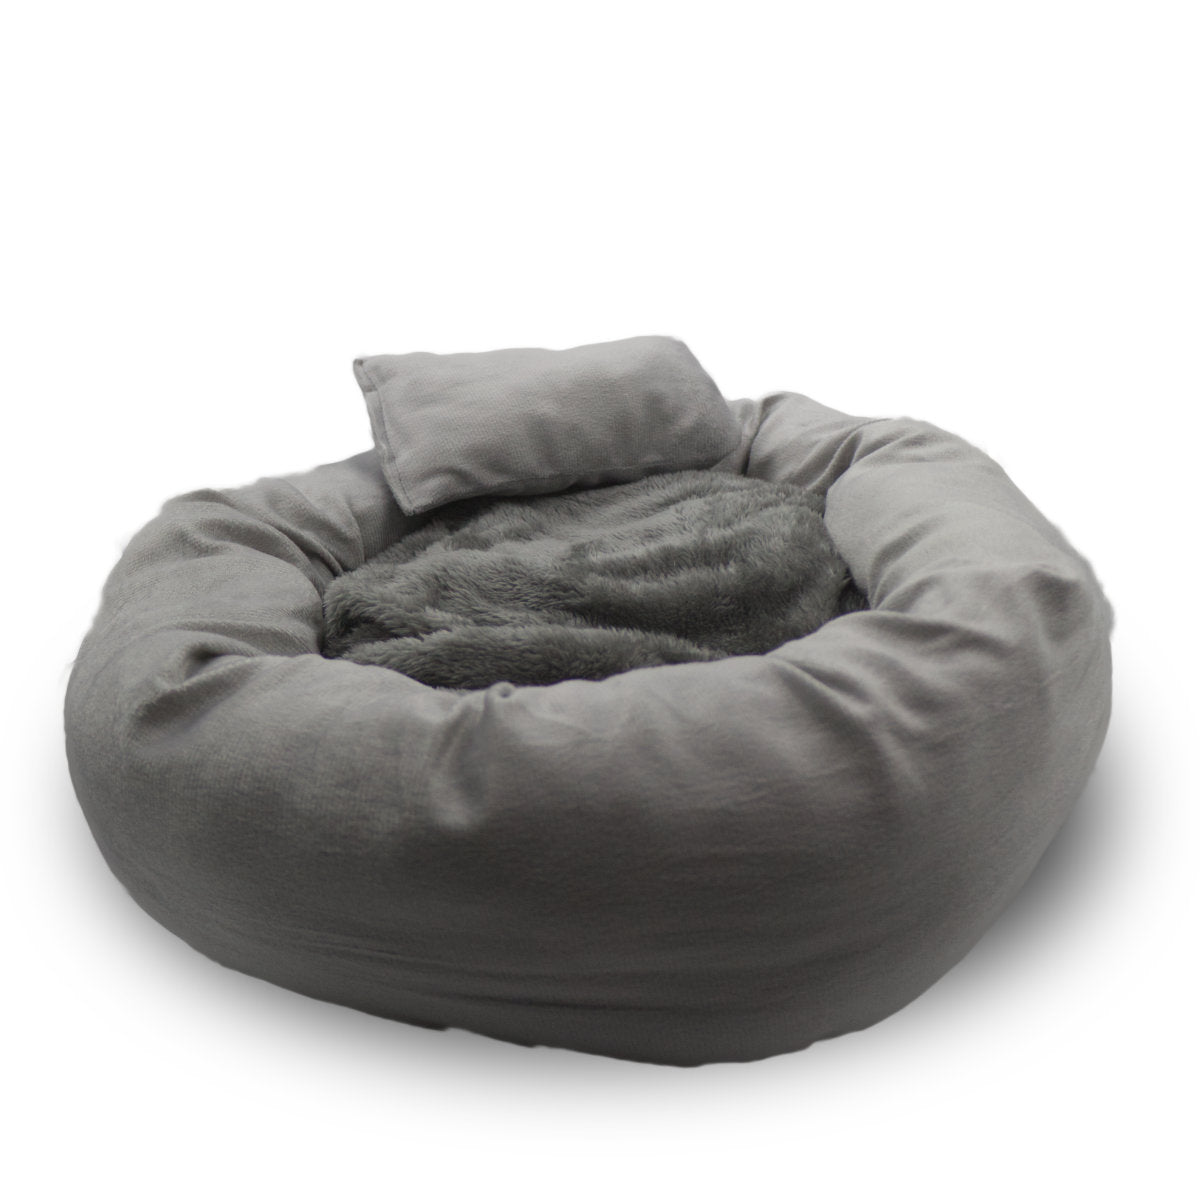 pet bed for cats and small dogs | cat tart bed